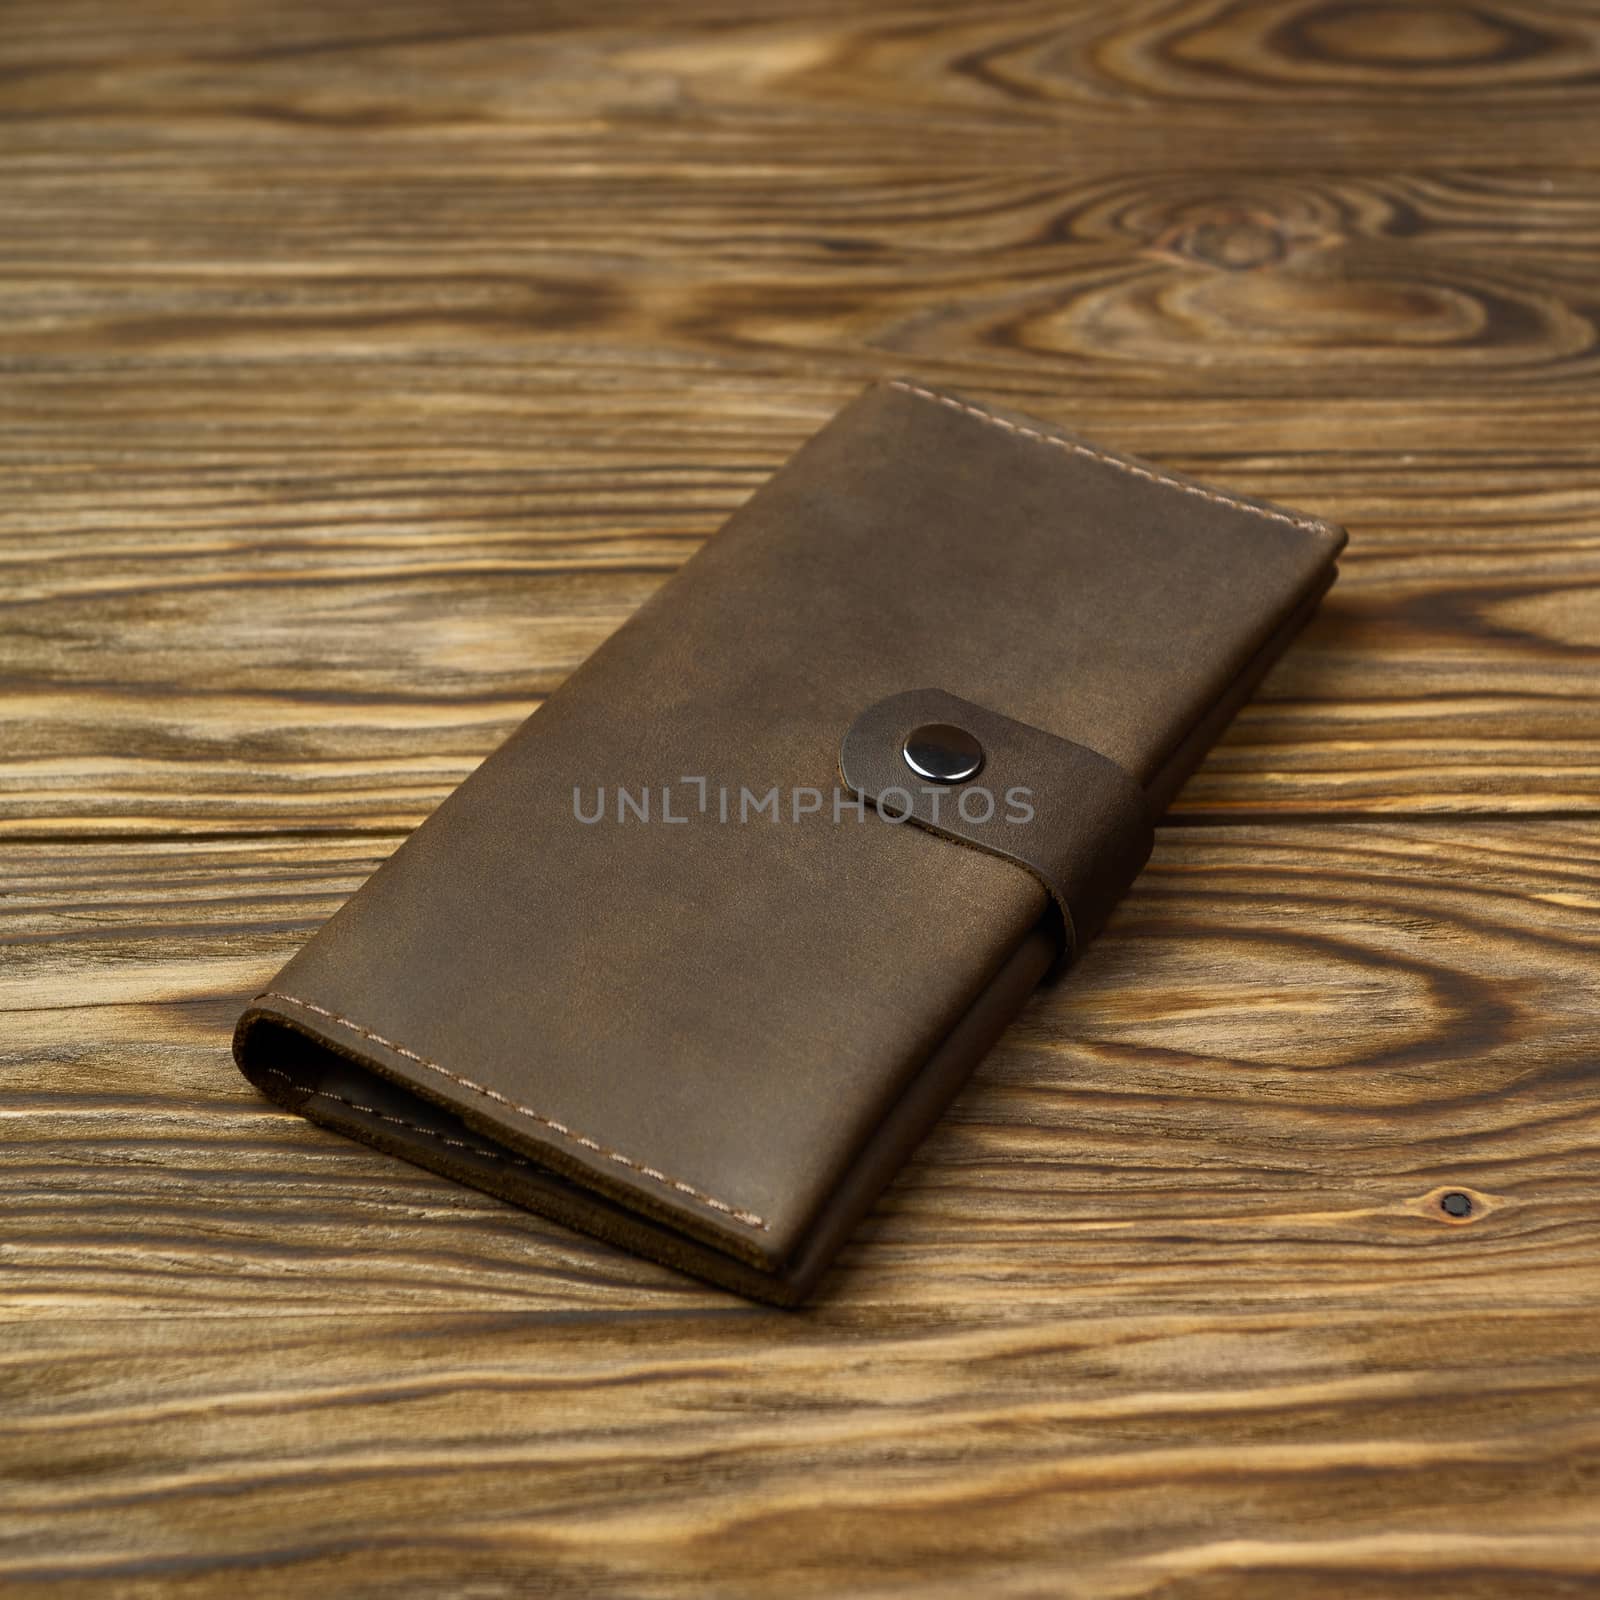 Brown color handmade leather wallet on textured wooden background. Wallet is unisex. Side view. Stock photo of luxury accessories.